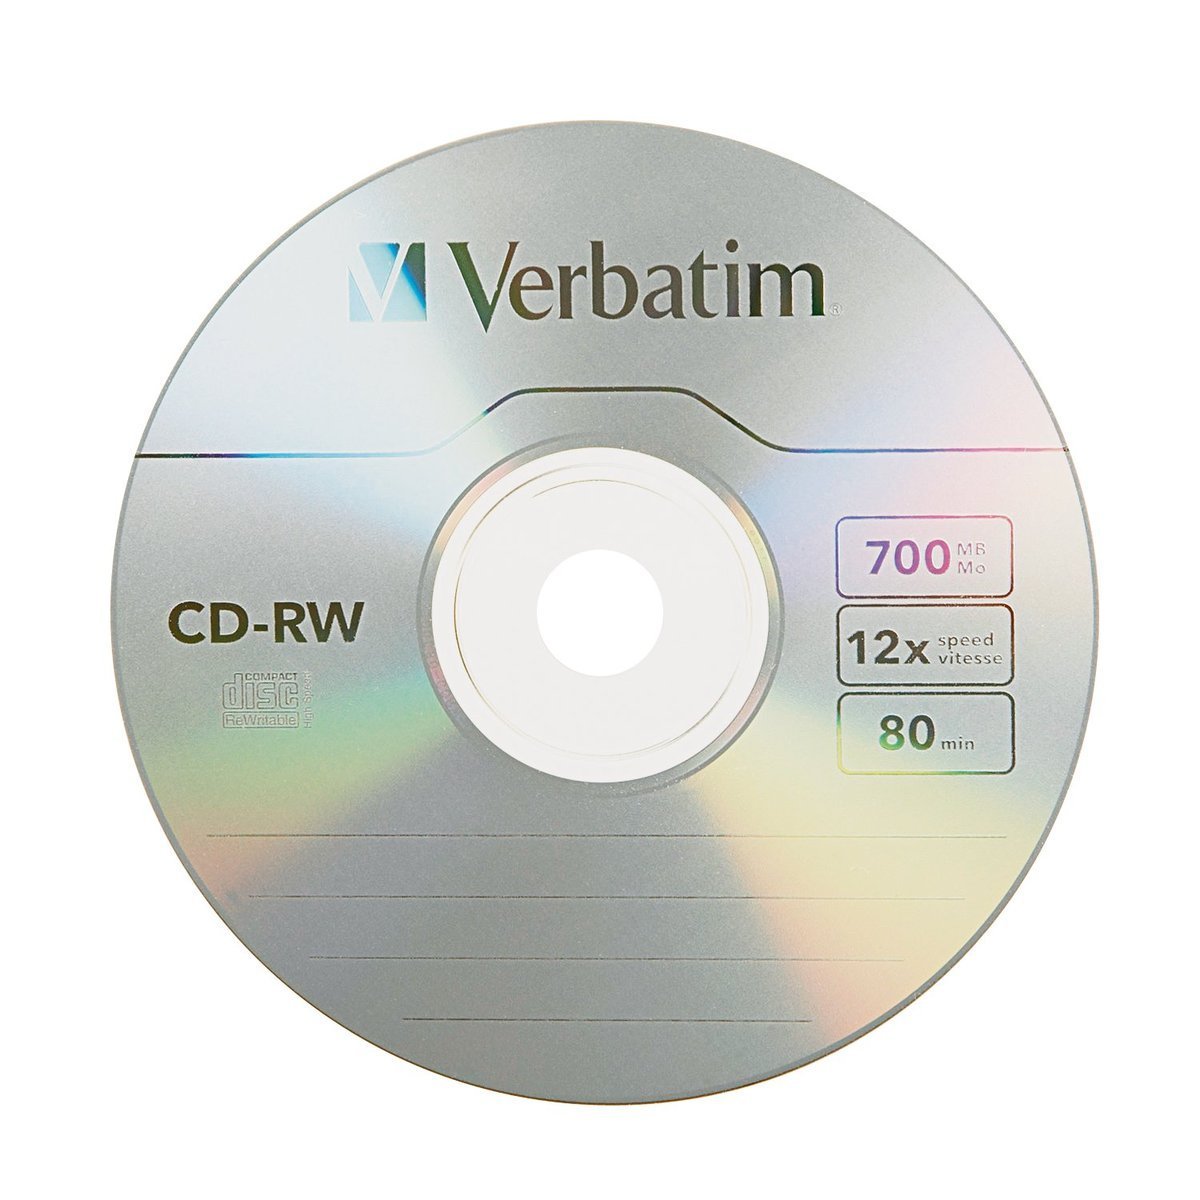 Verbatim 700MB 4x-12x 80 Minute Silver Rewritable Disc CD-RW, 25 Disc Spindle 95155 - image 2 of 8